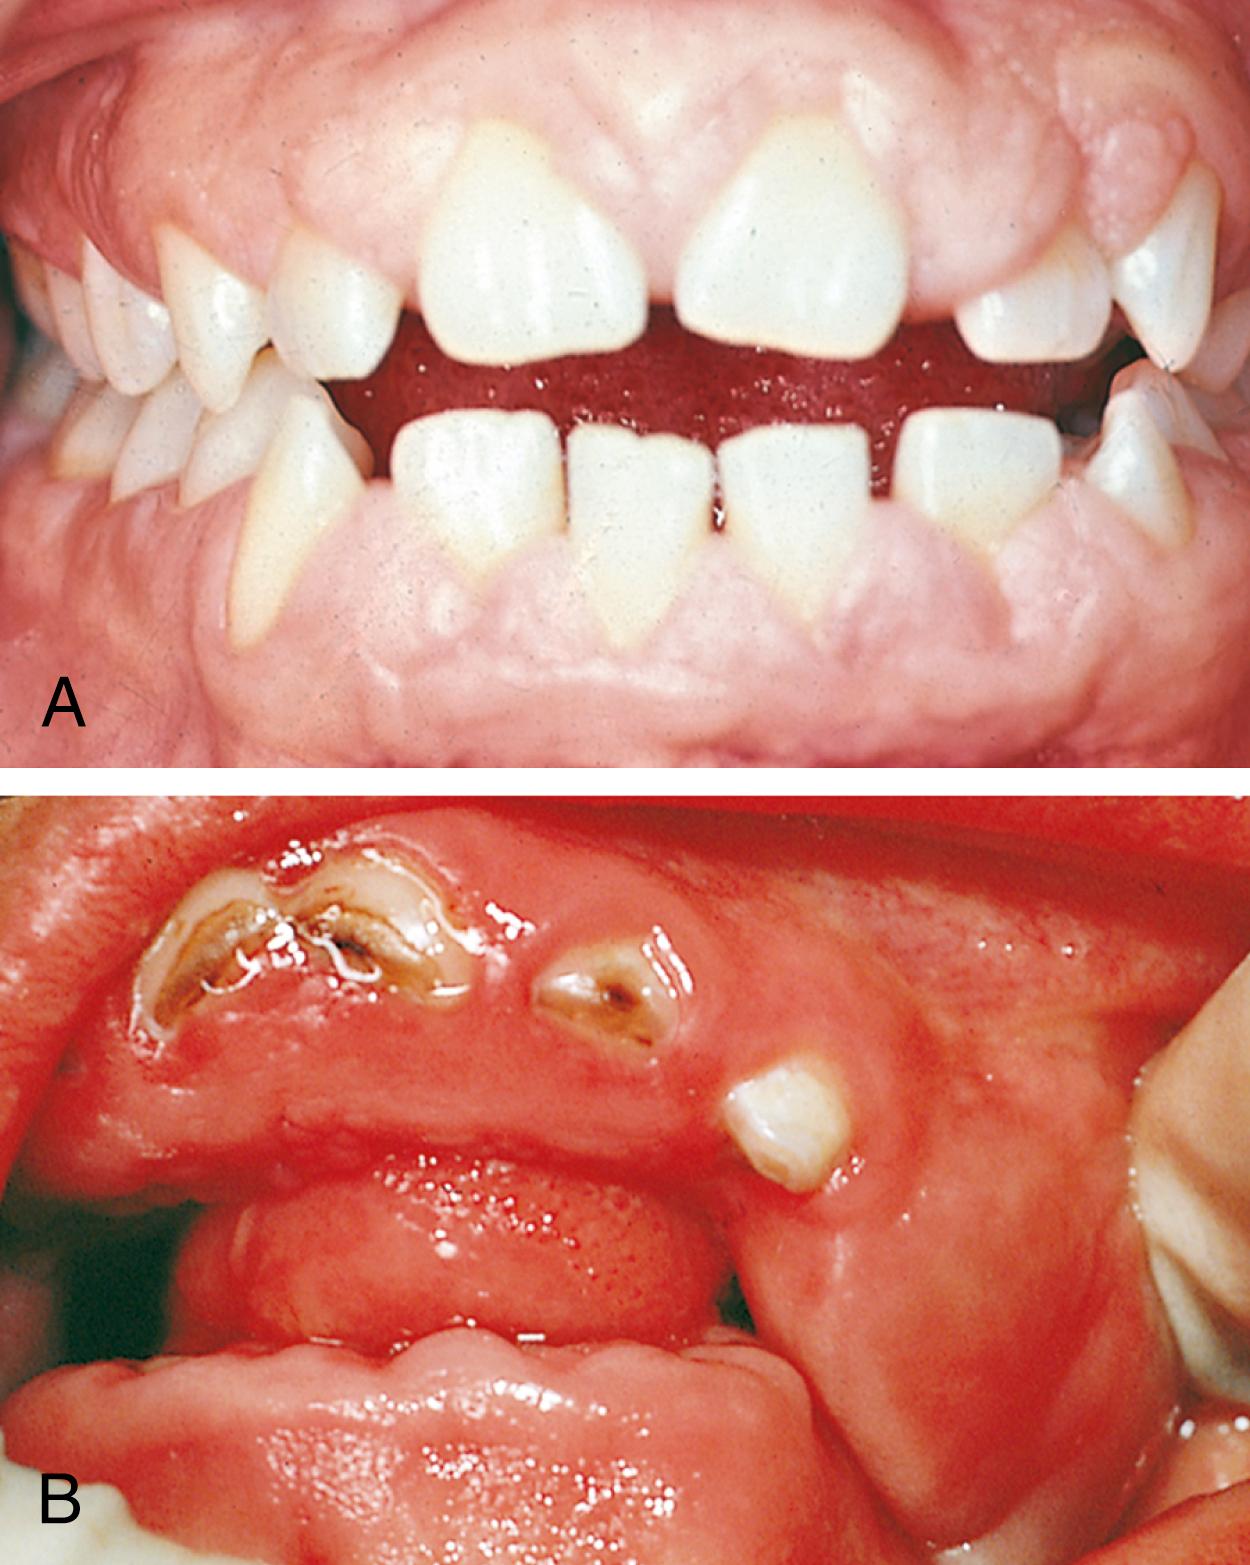 Fig. 21.24, Phenytoin-induced gingival overgrowth. (A) A typical gingival response (hyperplasia) to chronic phenytoin ingestion. Similar gum changes can result from cyclosporine therapy. (B) Severe overgrowth. The firm, hyperplastic gingival tissues have completely covered the posterior teeth and are interfering with mastication.